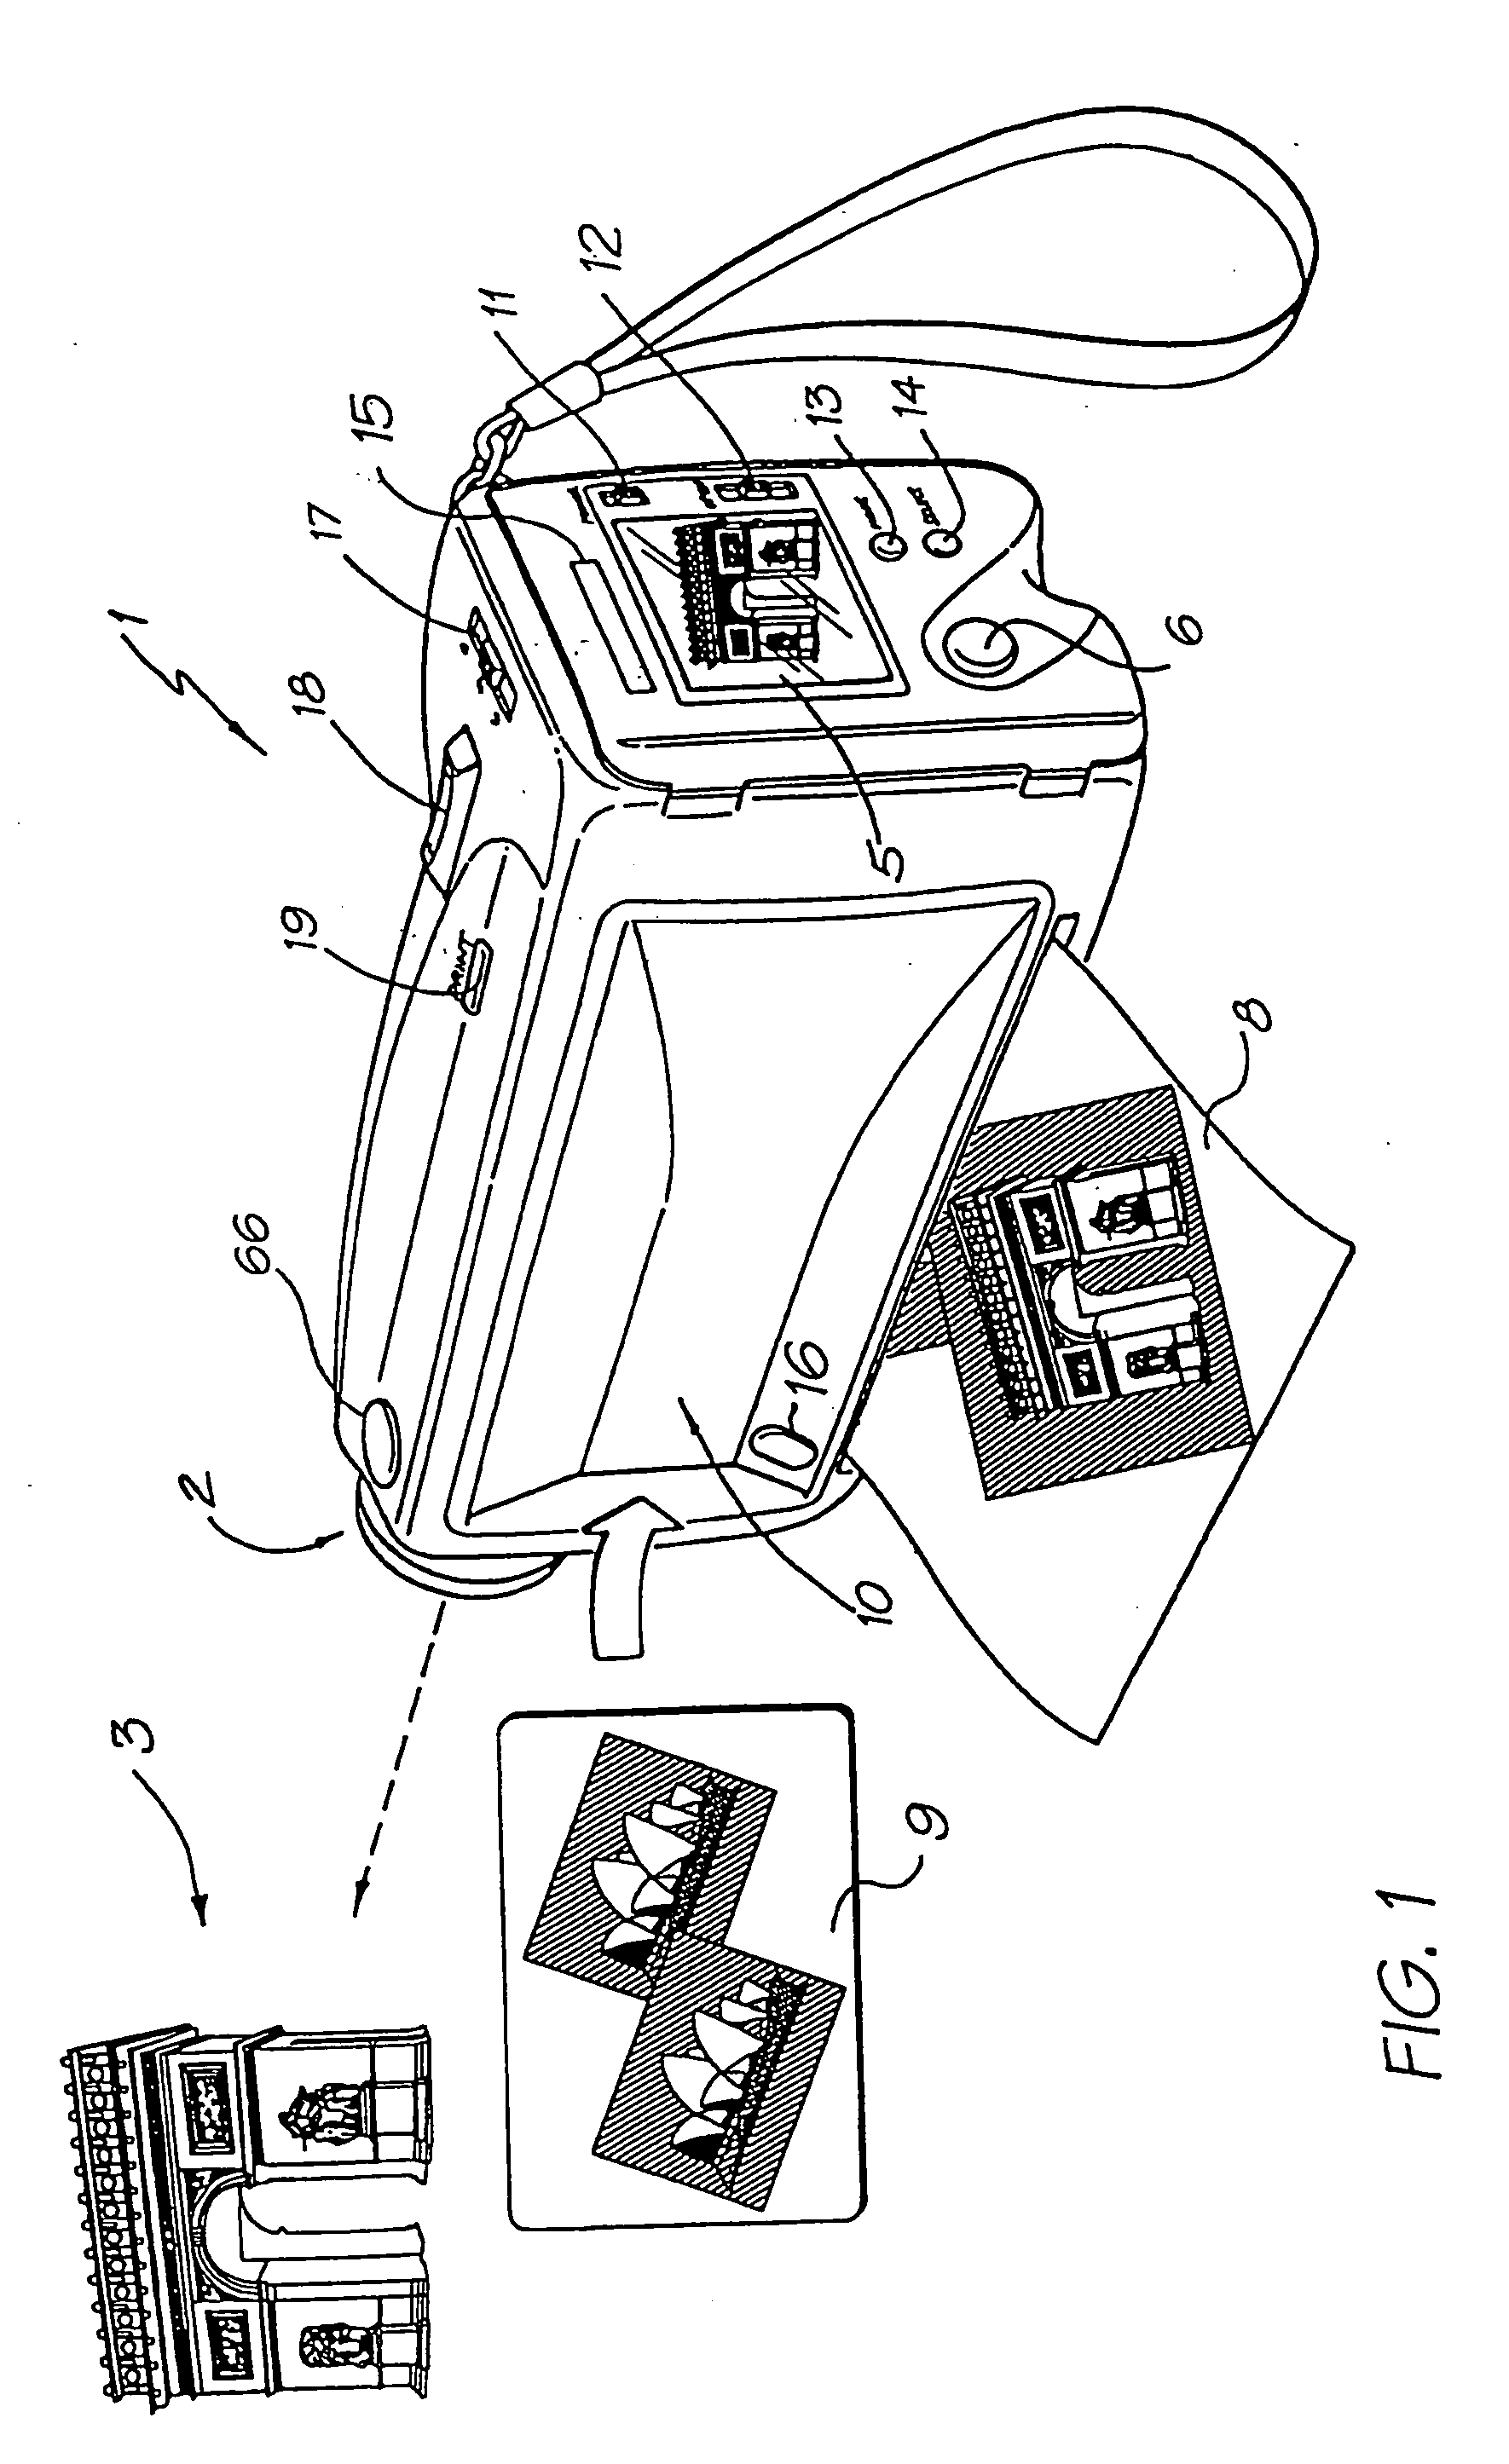 User interface for an image transformation device